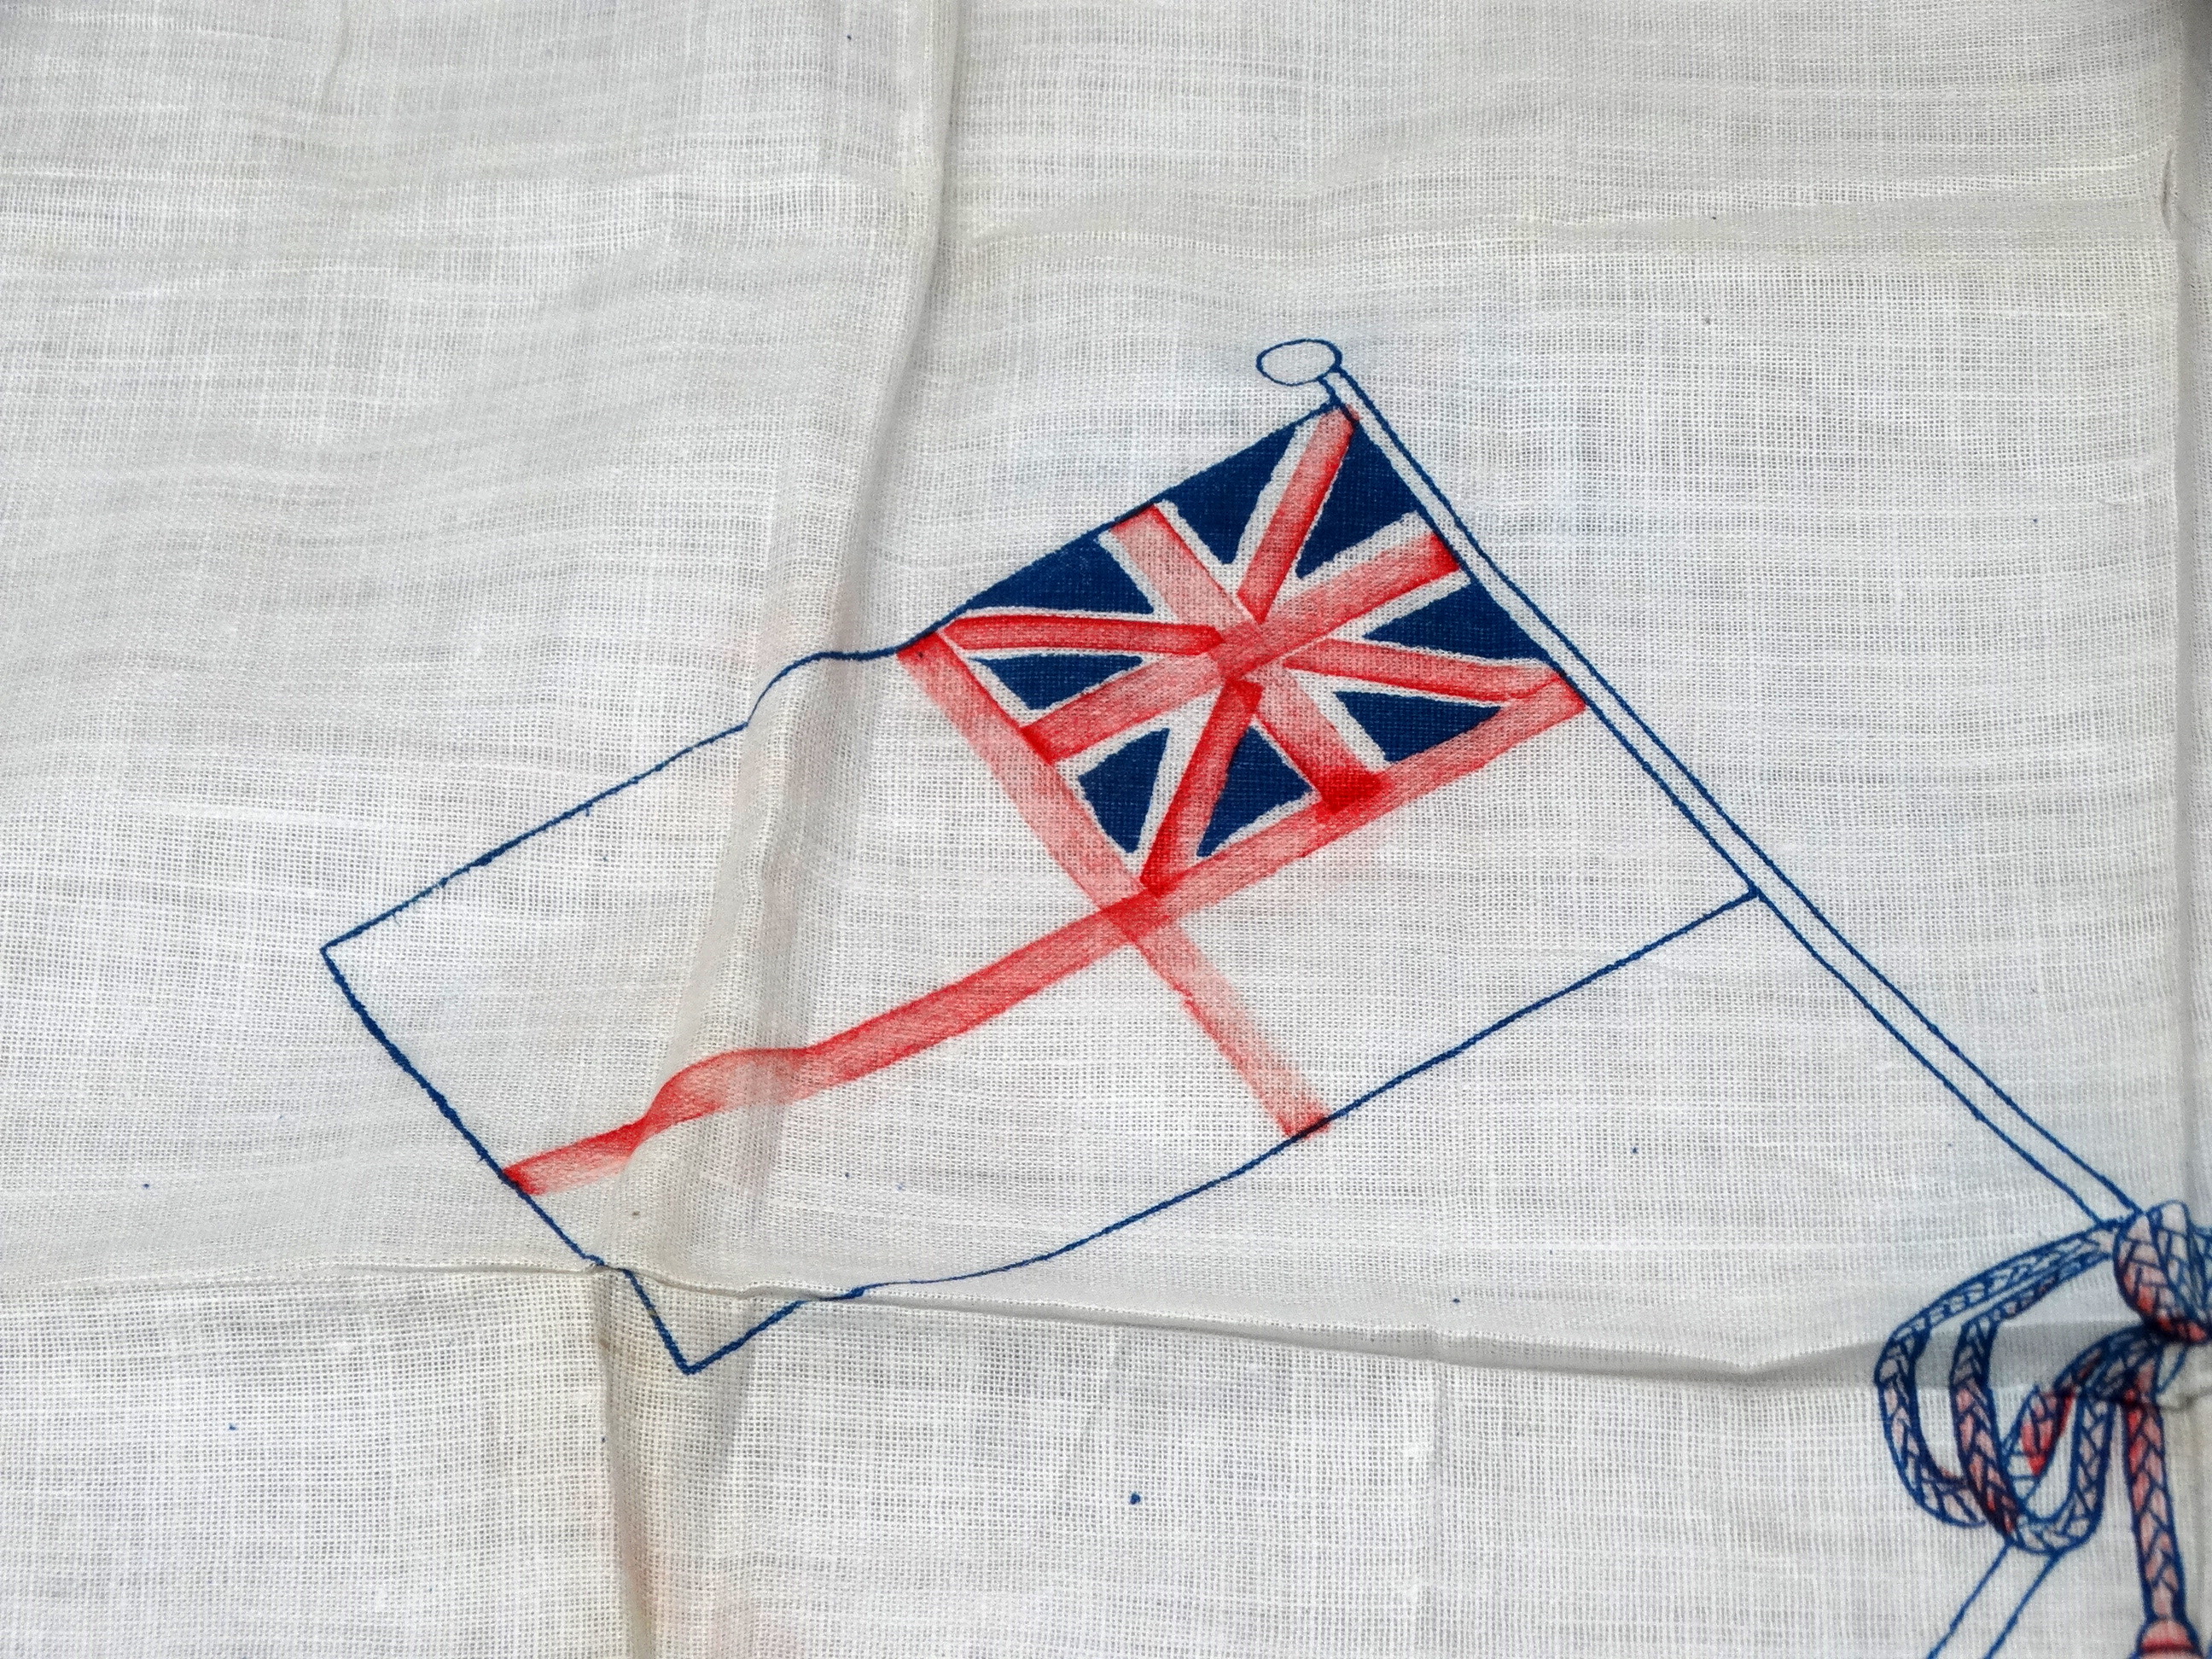 An Anglo-Japanese Alliance (1912-1923) silk handkerchief - decorated with the Royal Navy ensign - Image 4 of 5